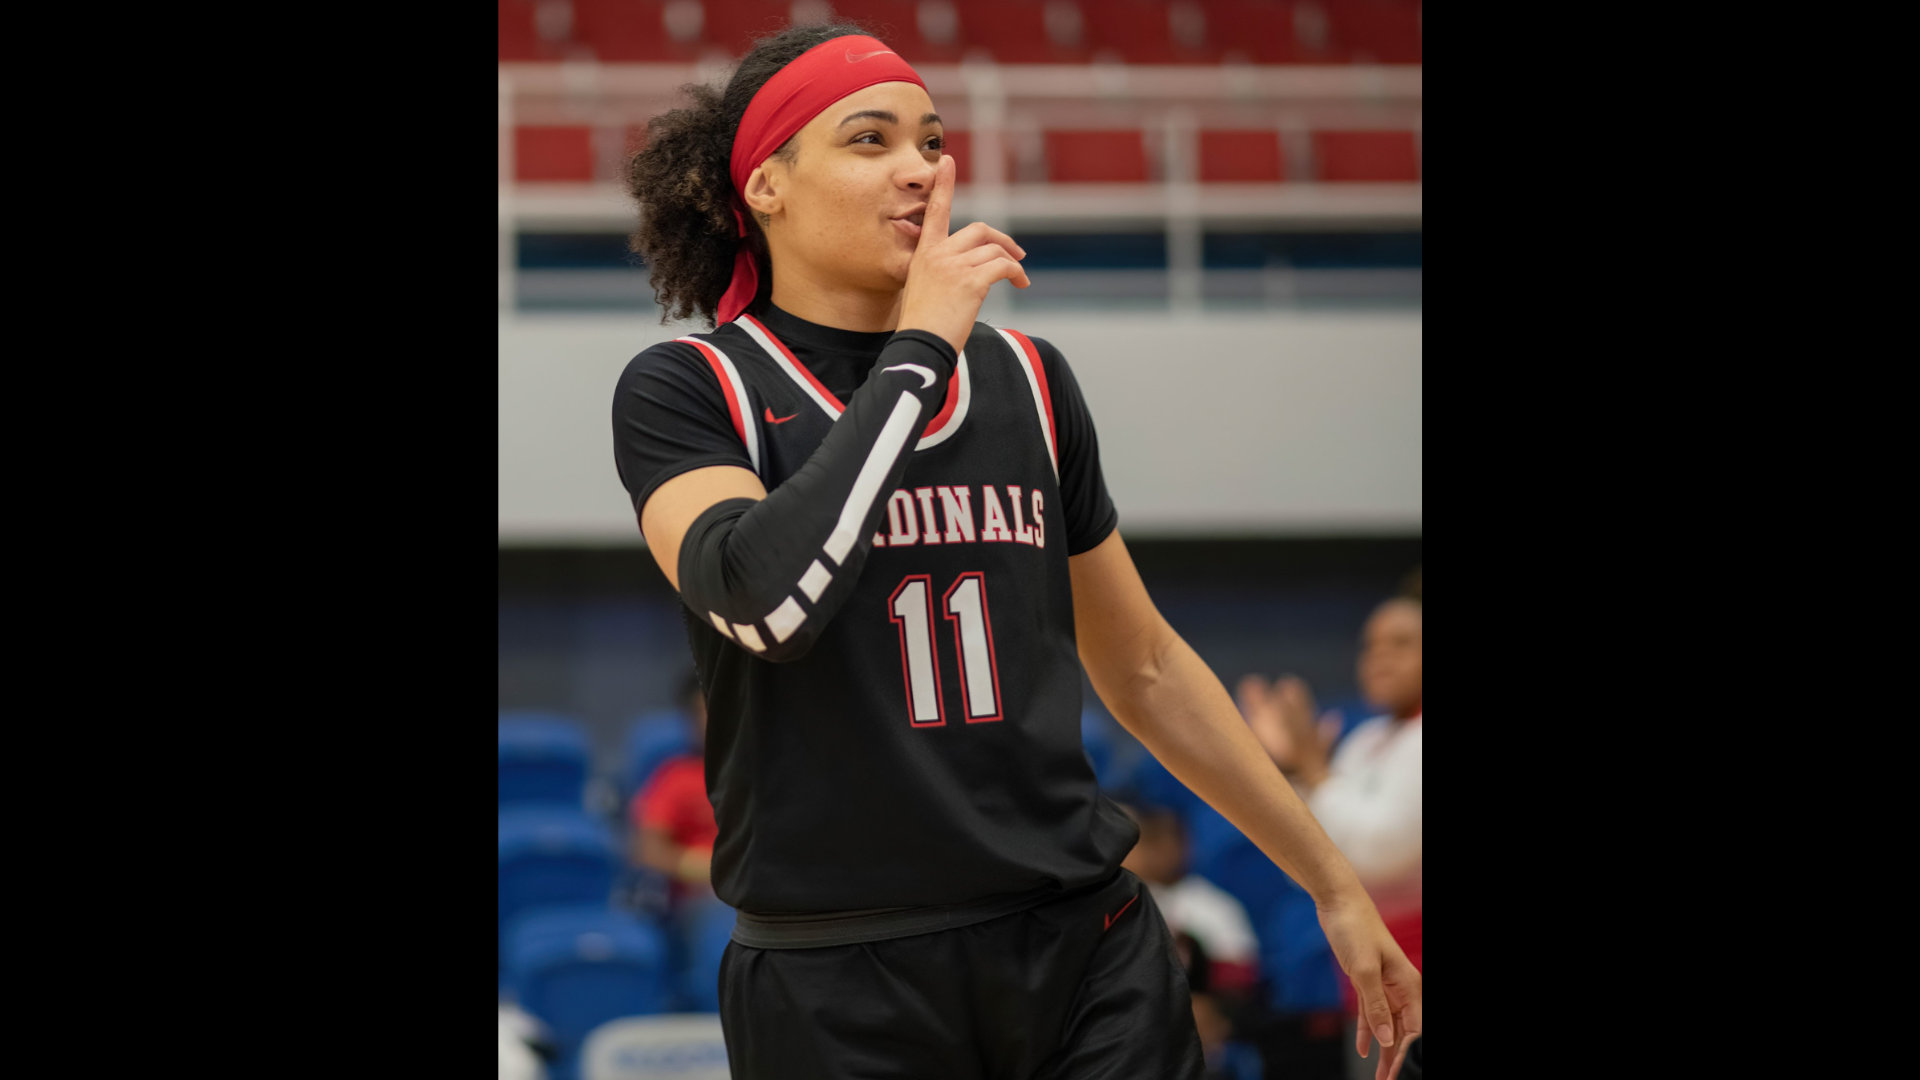 NEVER GIVE UP: Lady Card sophomore overcomes challenges